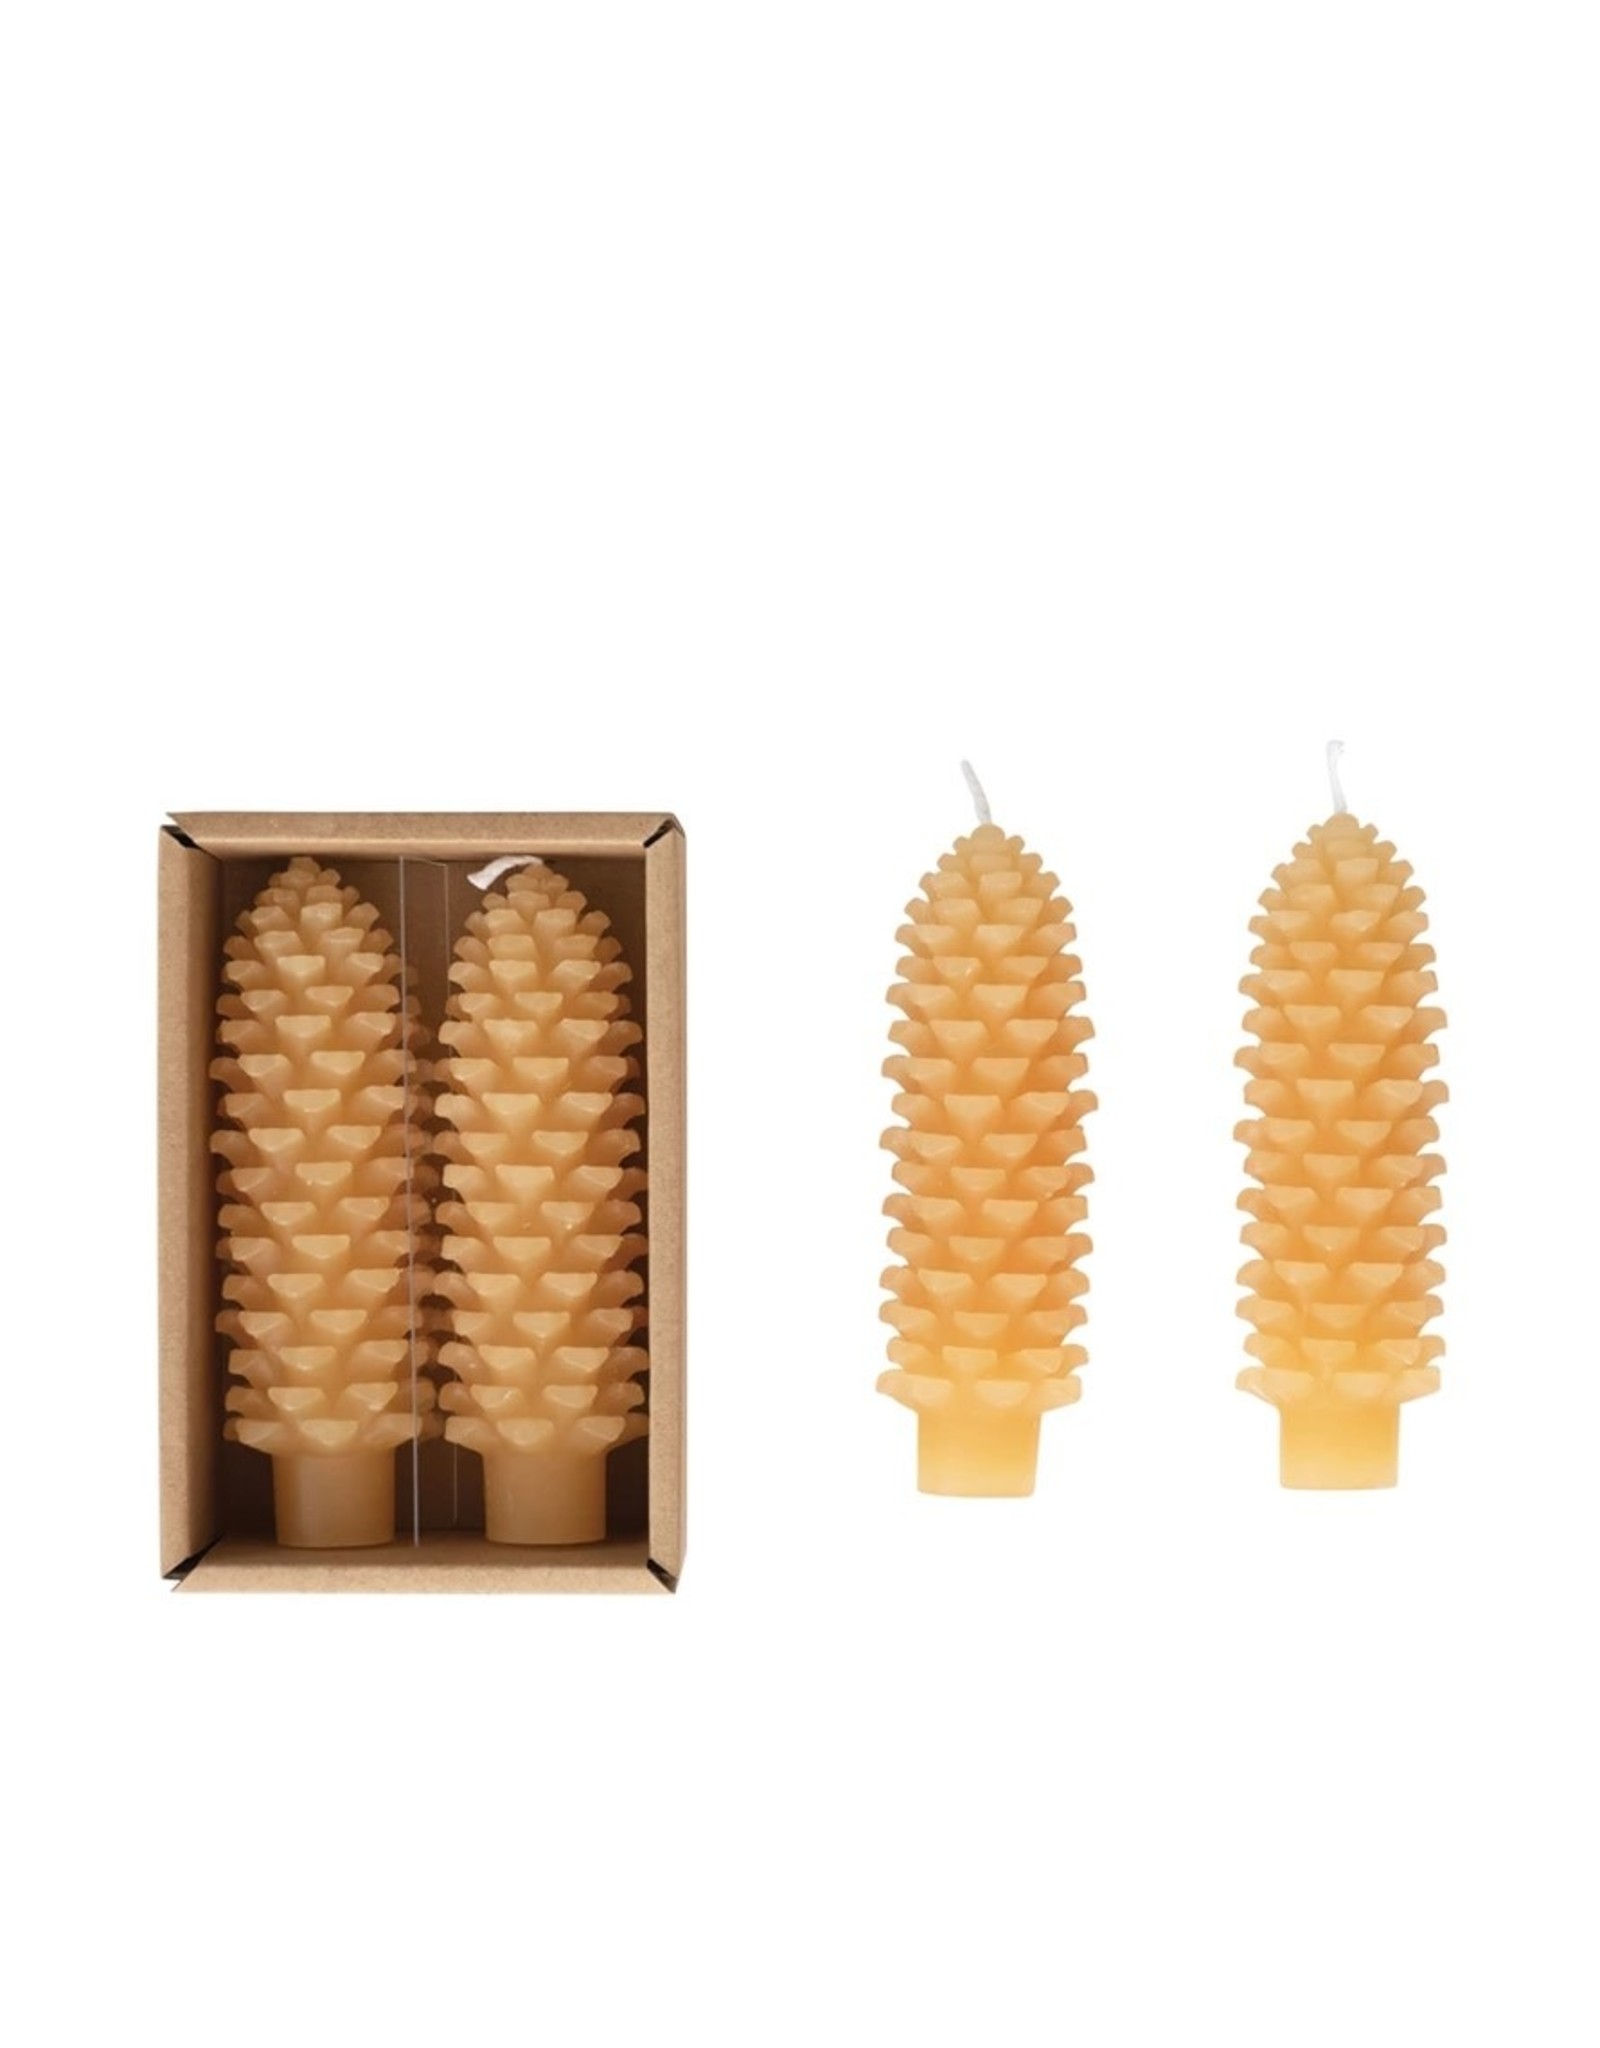 XS0416 Unscented Pinecone Shaped Taper Candles, Set of 2